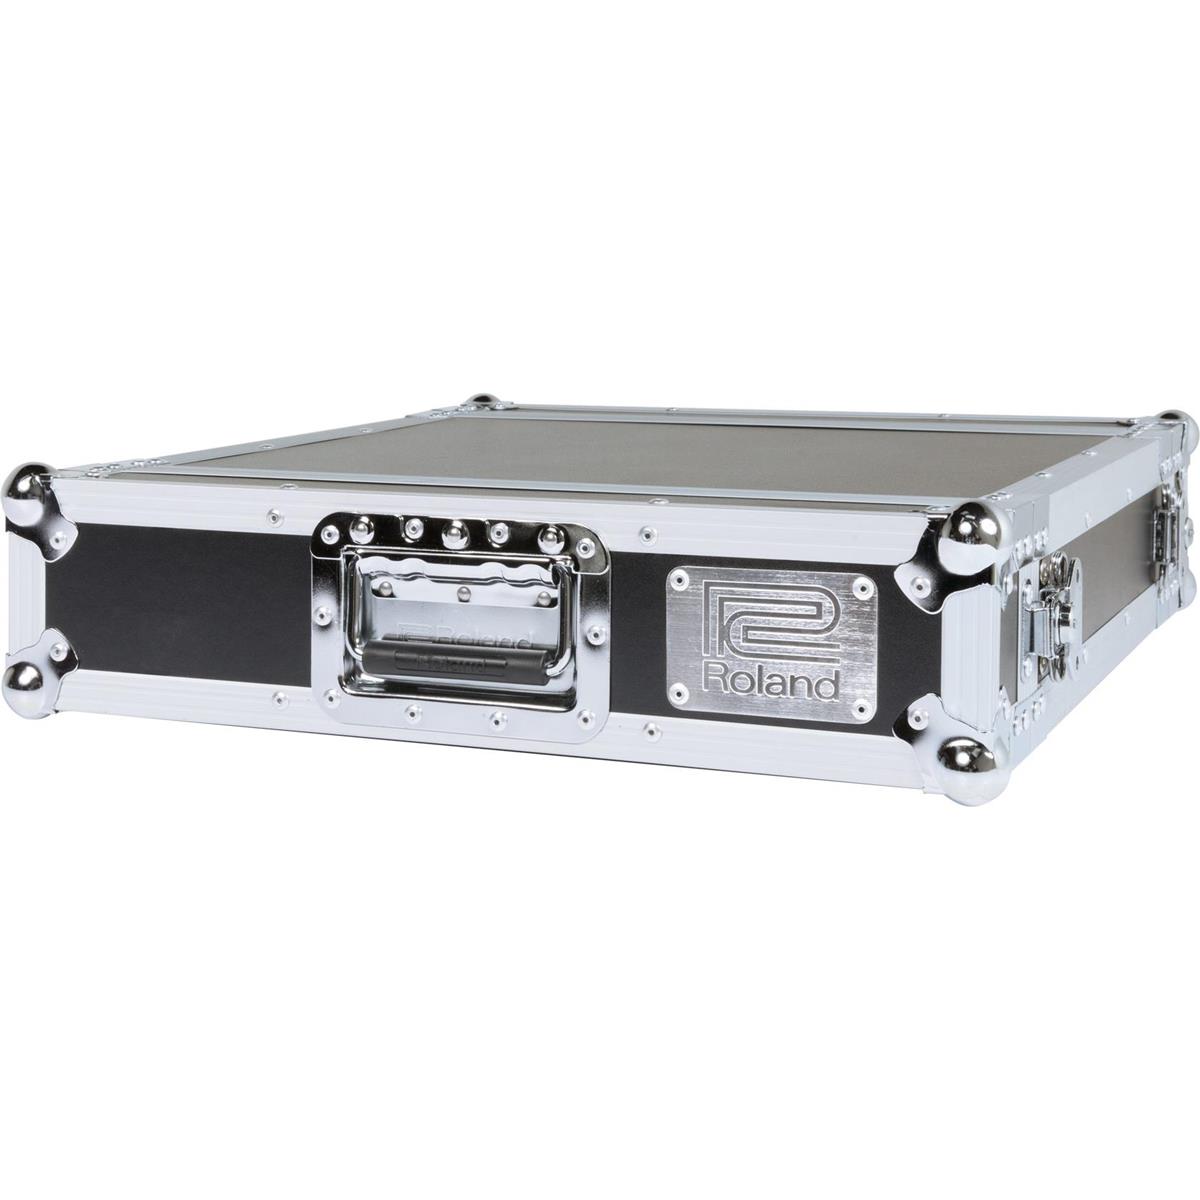 Image of Roland Black Series 2 Space Rackmount Road Case